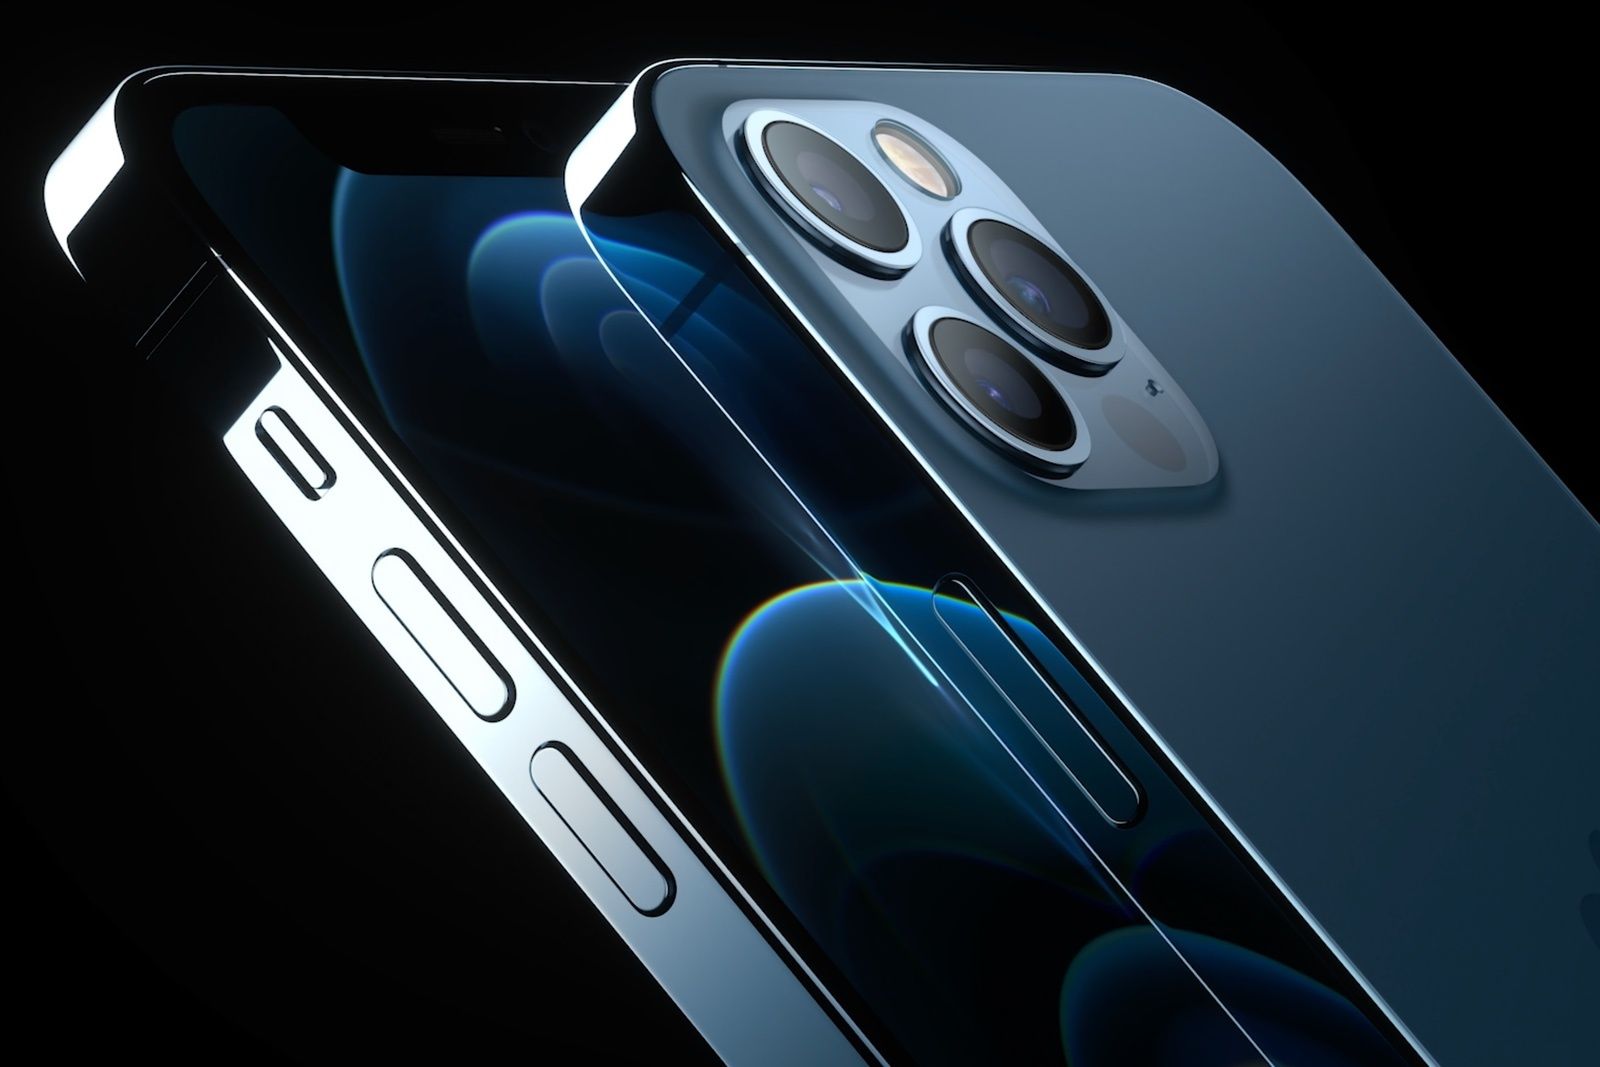 Apple iPhone 12 Pro and iPhone 12 Pro Max revealed with new cameras, new design, and 5G photo 1